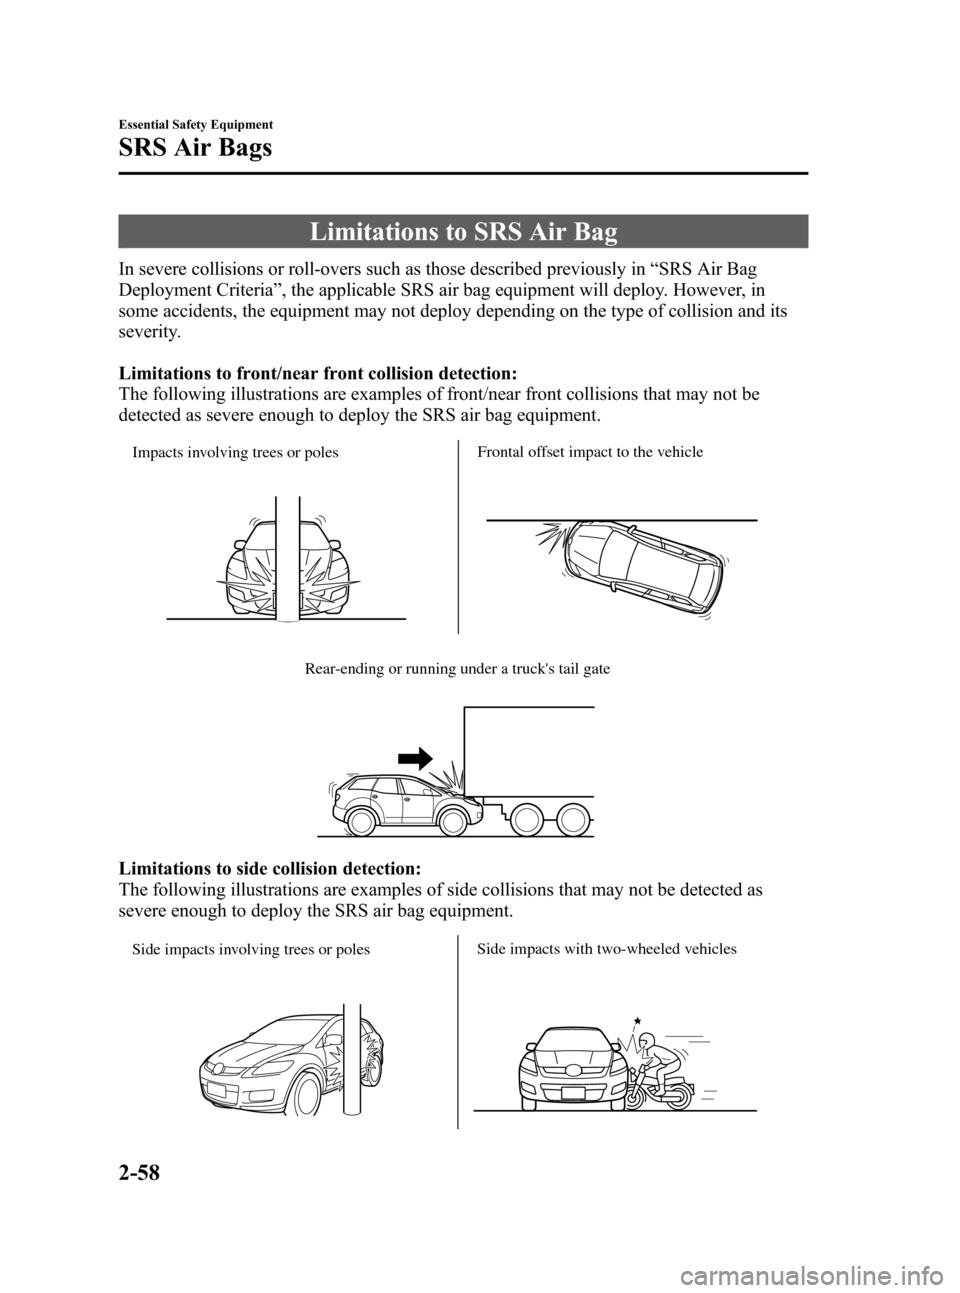 MAZDA MODEL CX-7 2009  Owners Manual (in English) Black plate (70,1)
Limitations to SRS Air Bag
In severe collisions or roll-overs such as those described previously in“SRS Air Bag
Deployment Criteria”, the applicable SRS air bag equipment will d